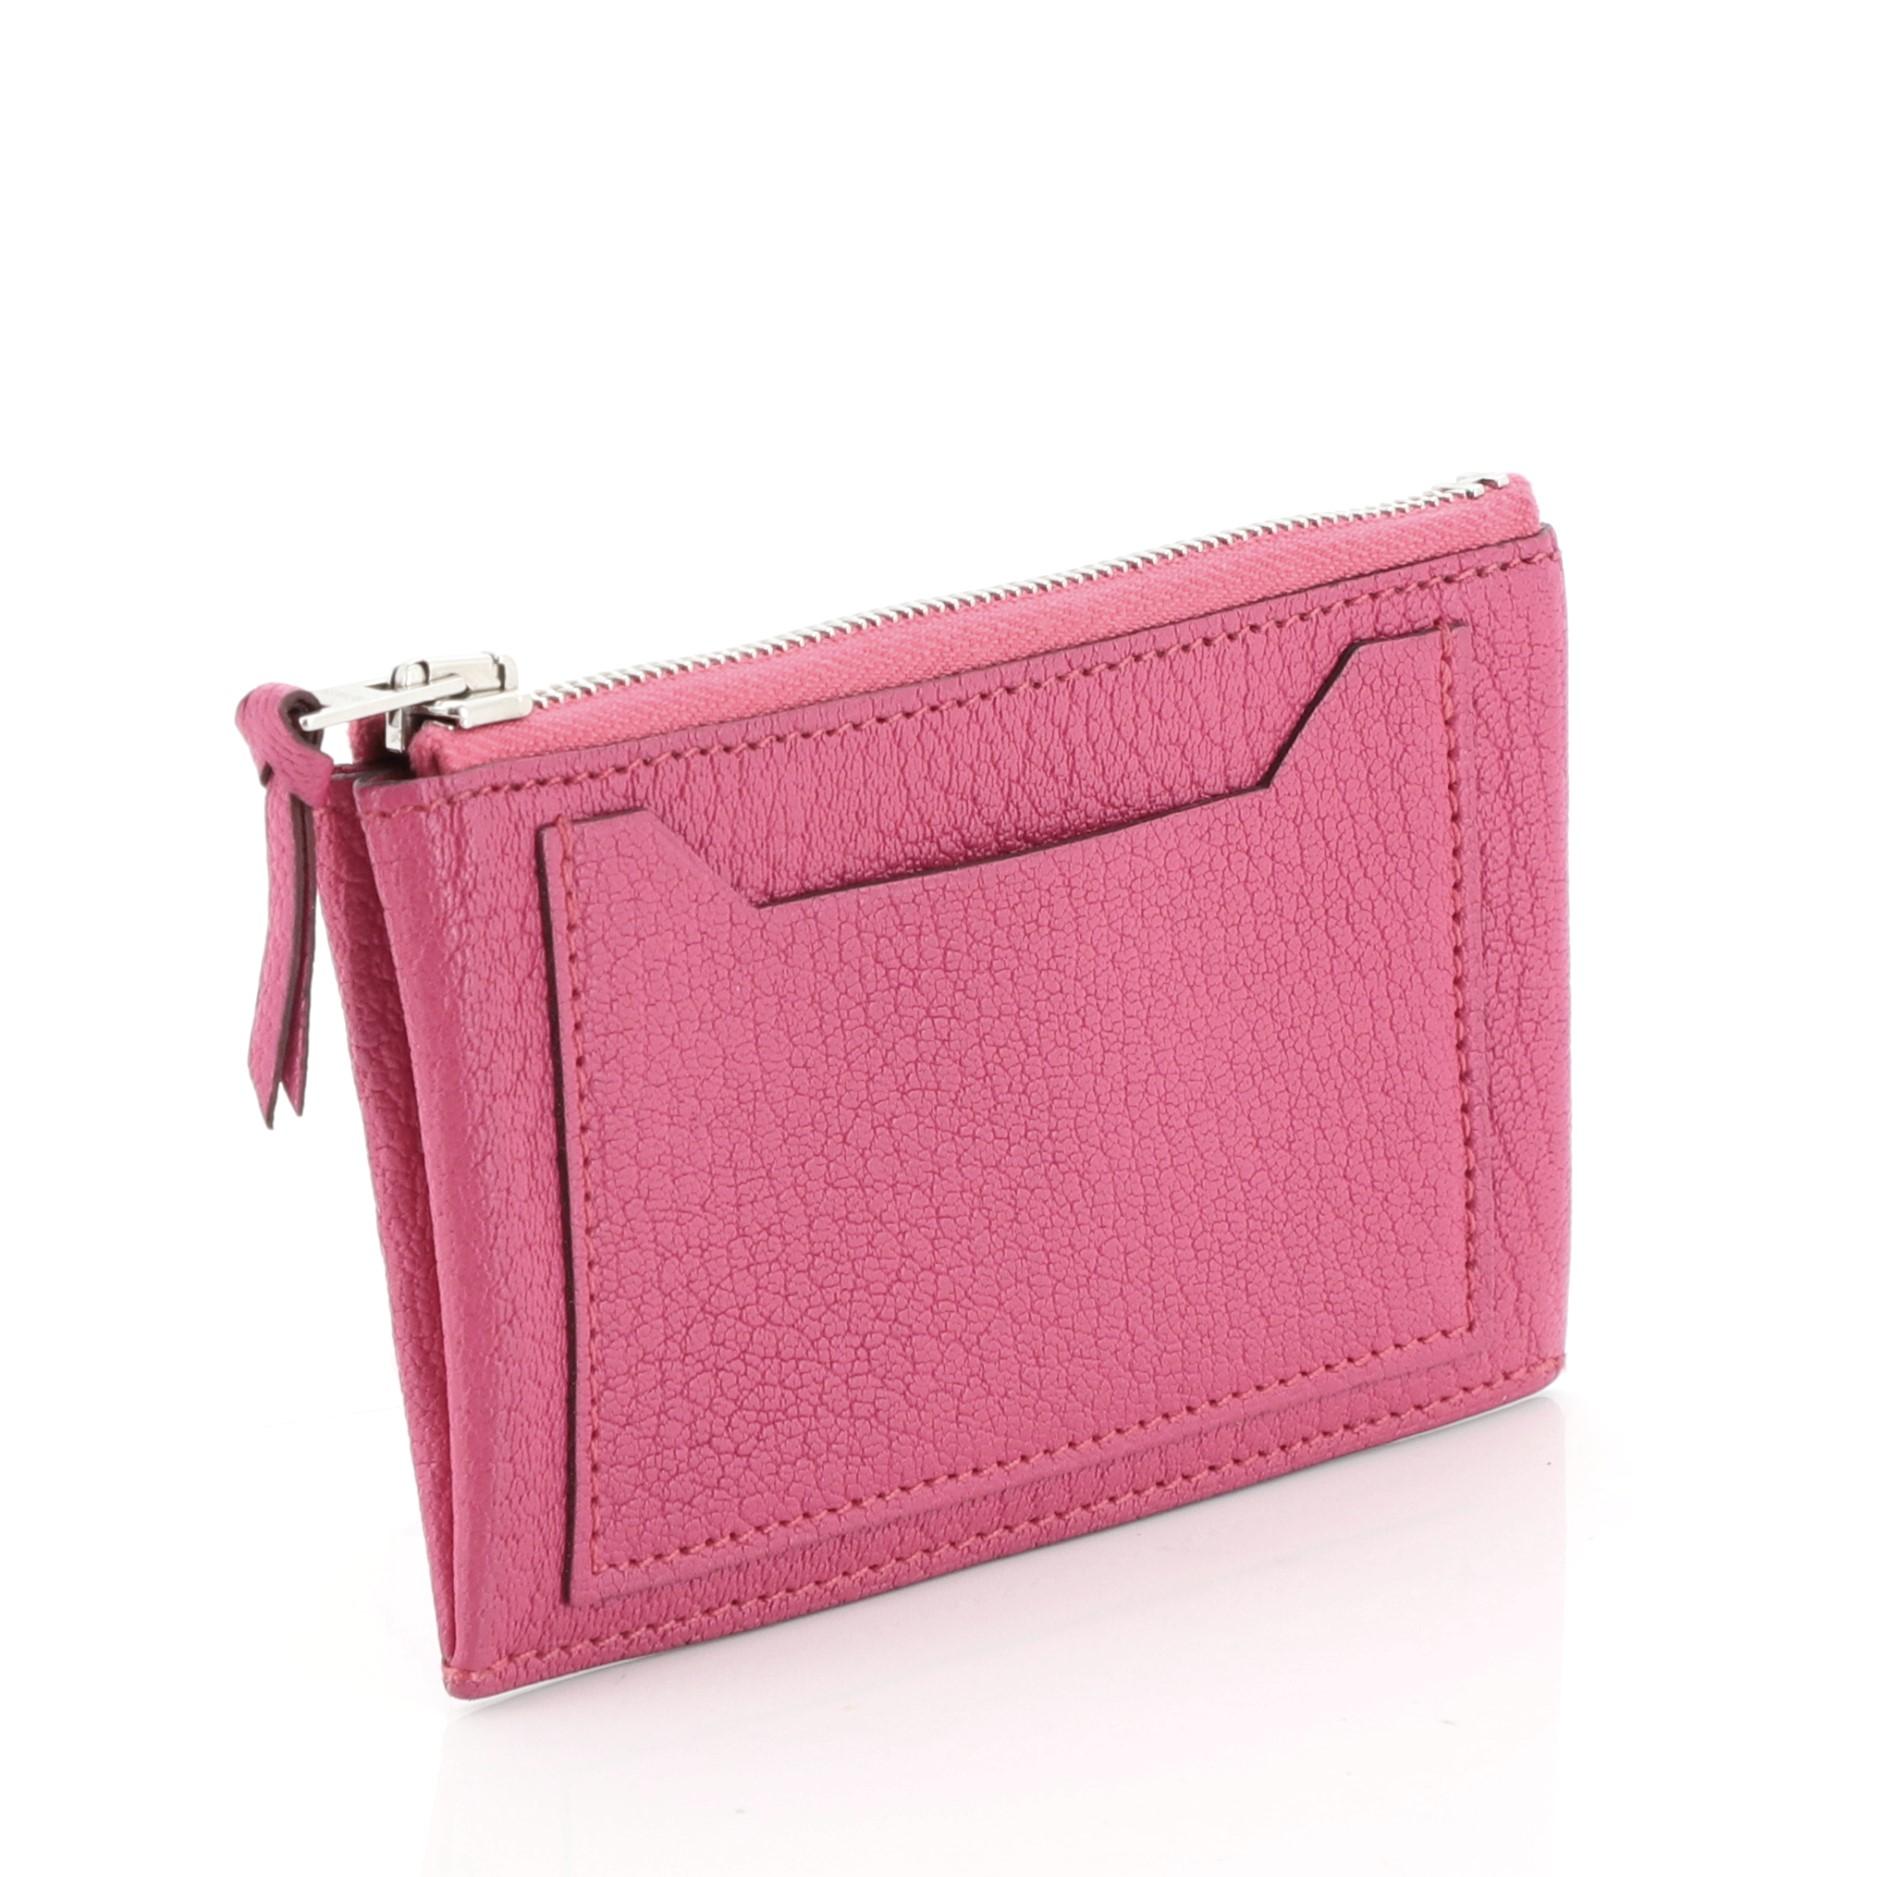 This Hermes Clarisse Zip Pouch Chevre Mysore PM, crafted from pink leather, features an exterior slip pocket and palladium hardware. Its zip closure opens to a pink leather interior. 

Estimated Retail Price: $525
Condition: Excellent. Minor wear on